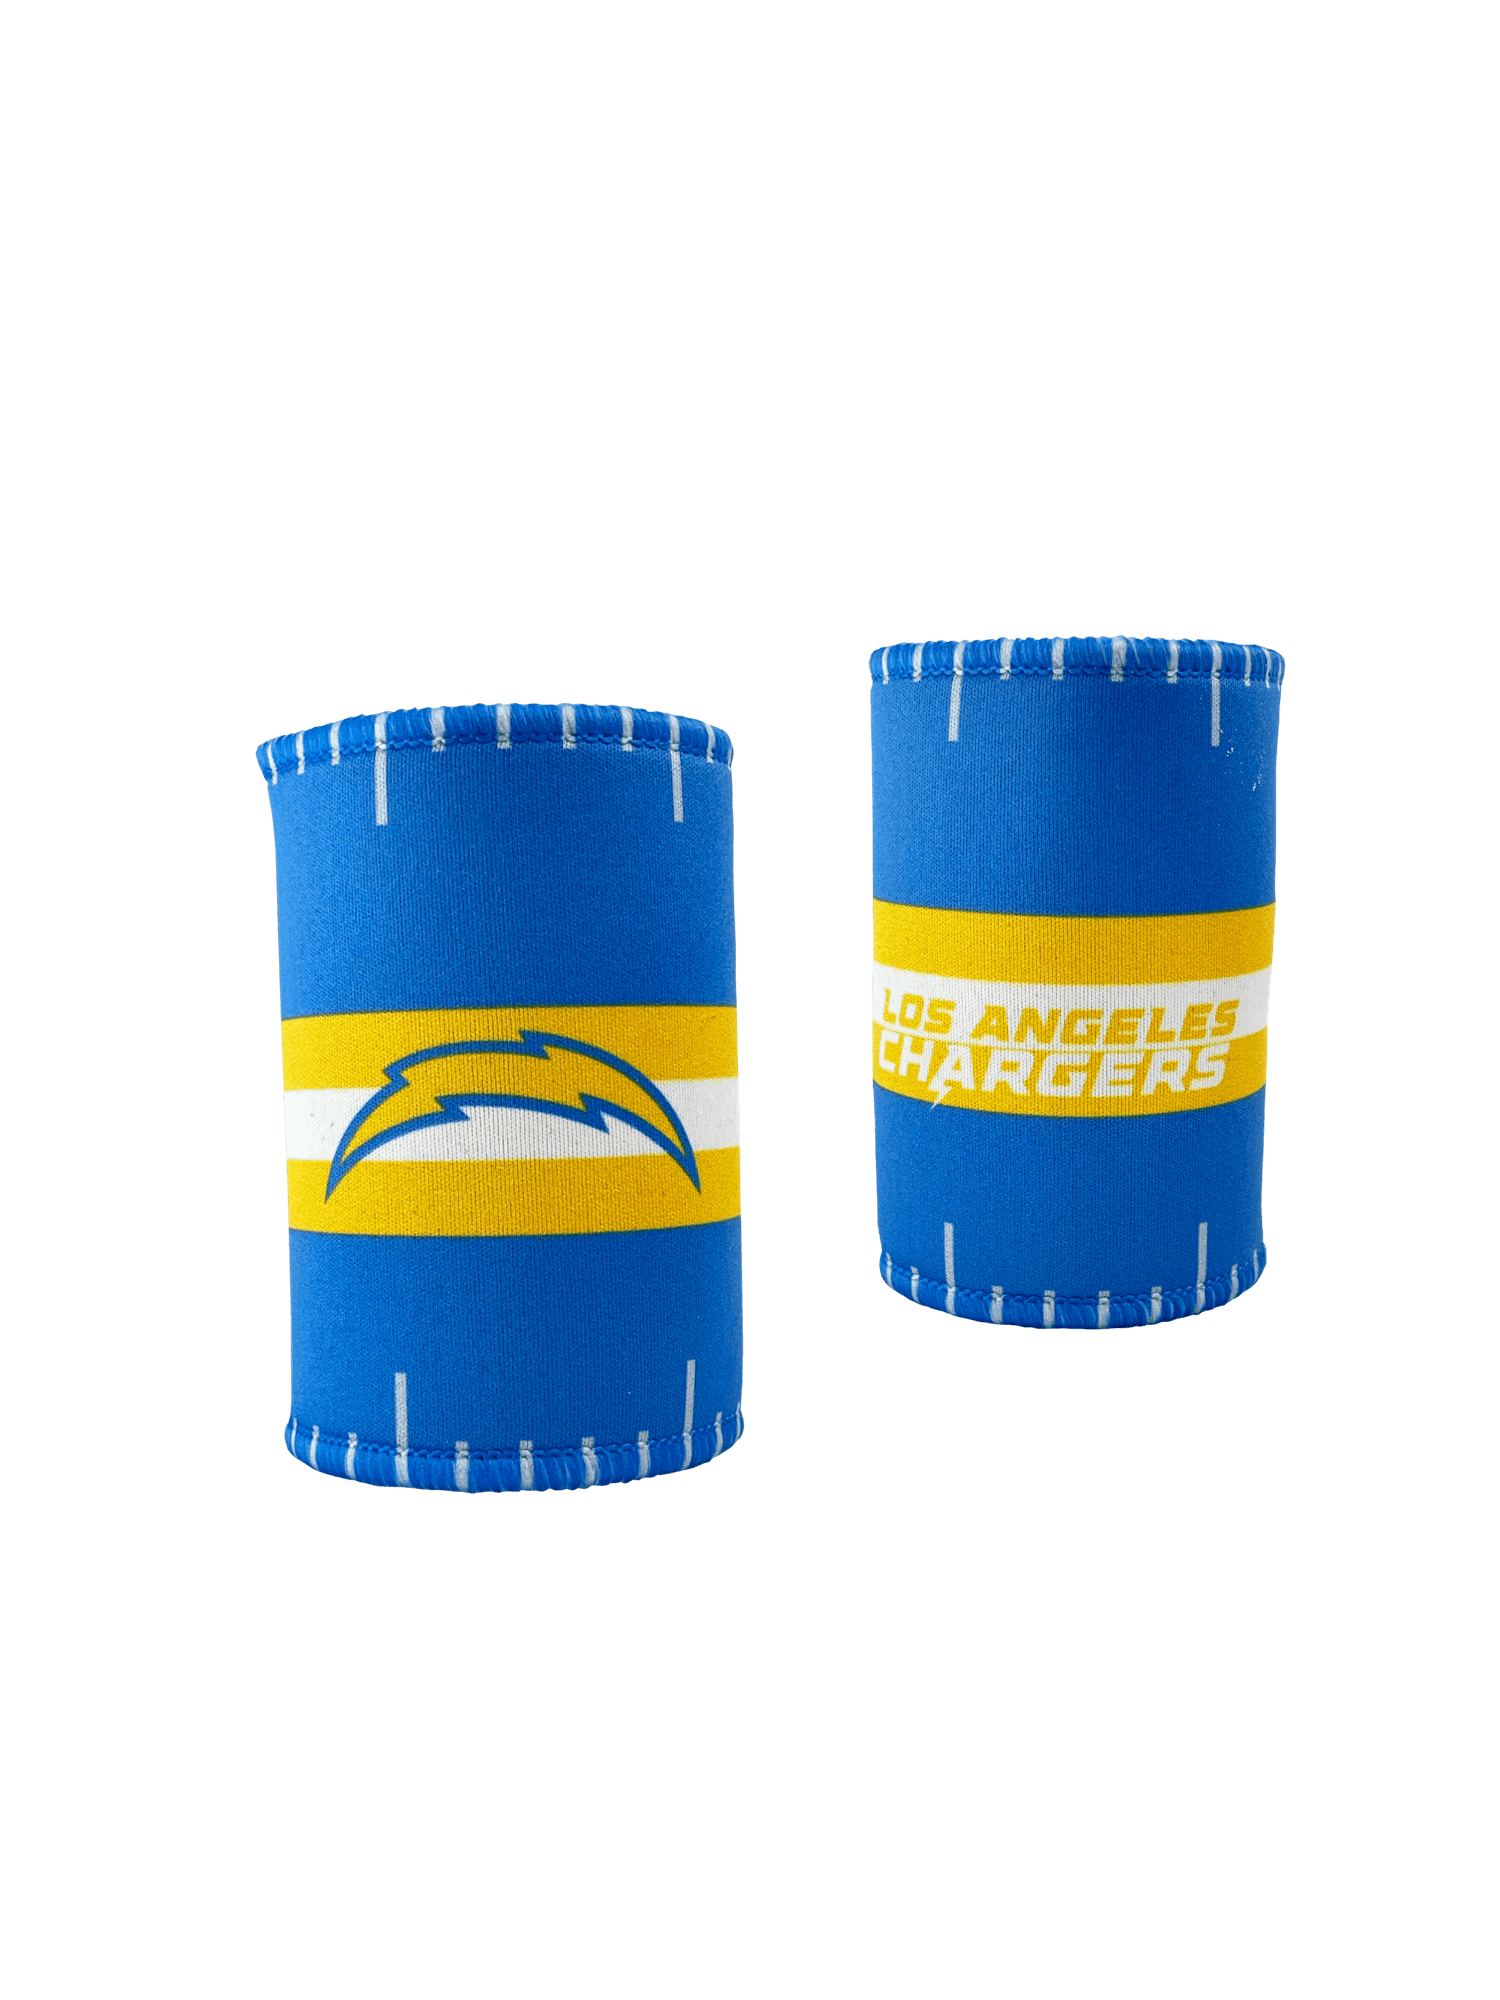 LA CHARGERS NFL STUBBY HOLDER_LA CHARGERS_STUBBY CLUB